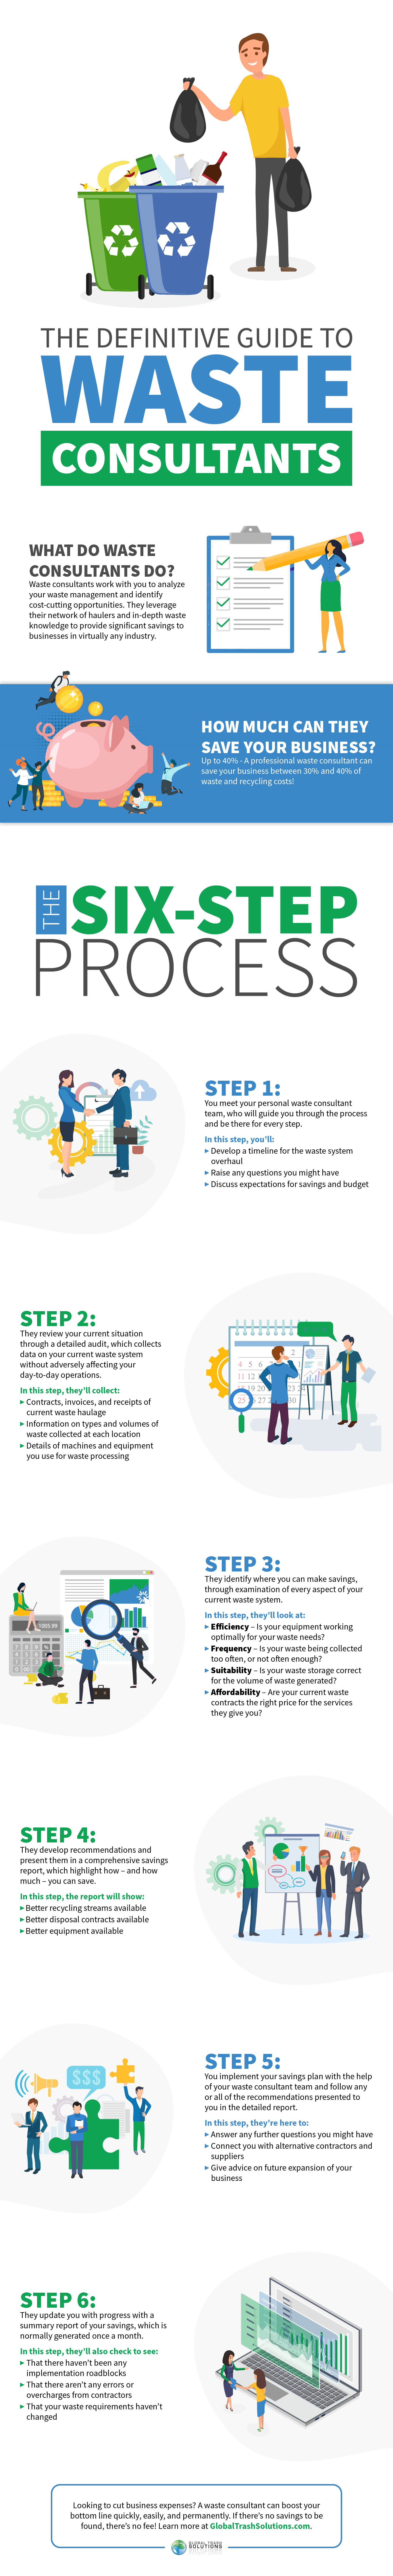 Guide to Waste Consultants Infographic